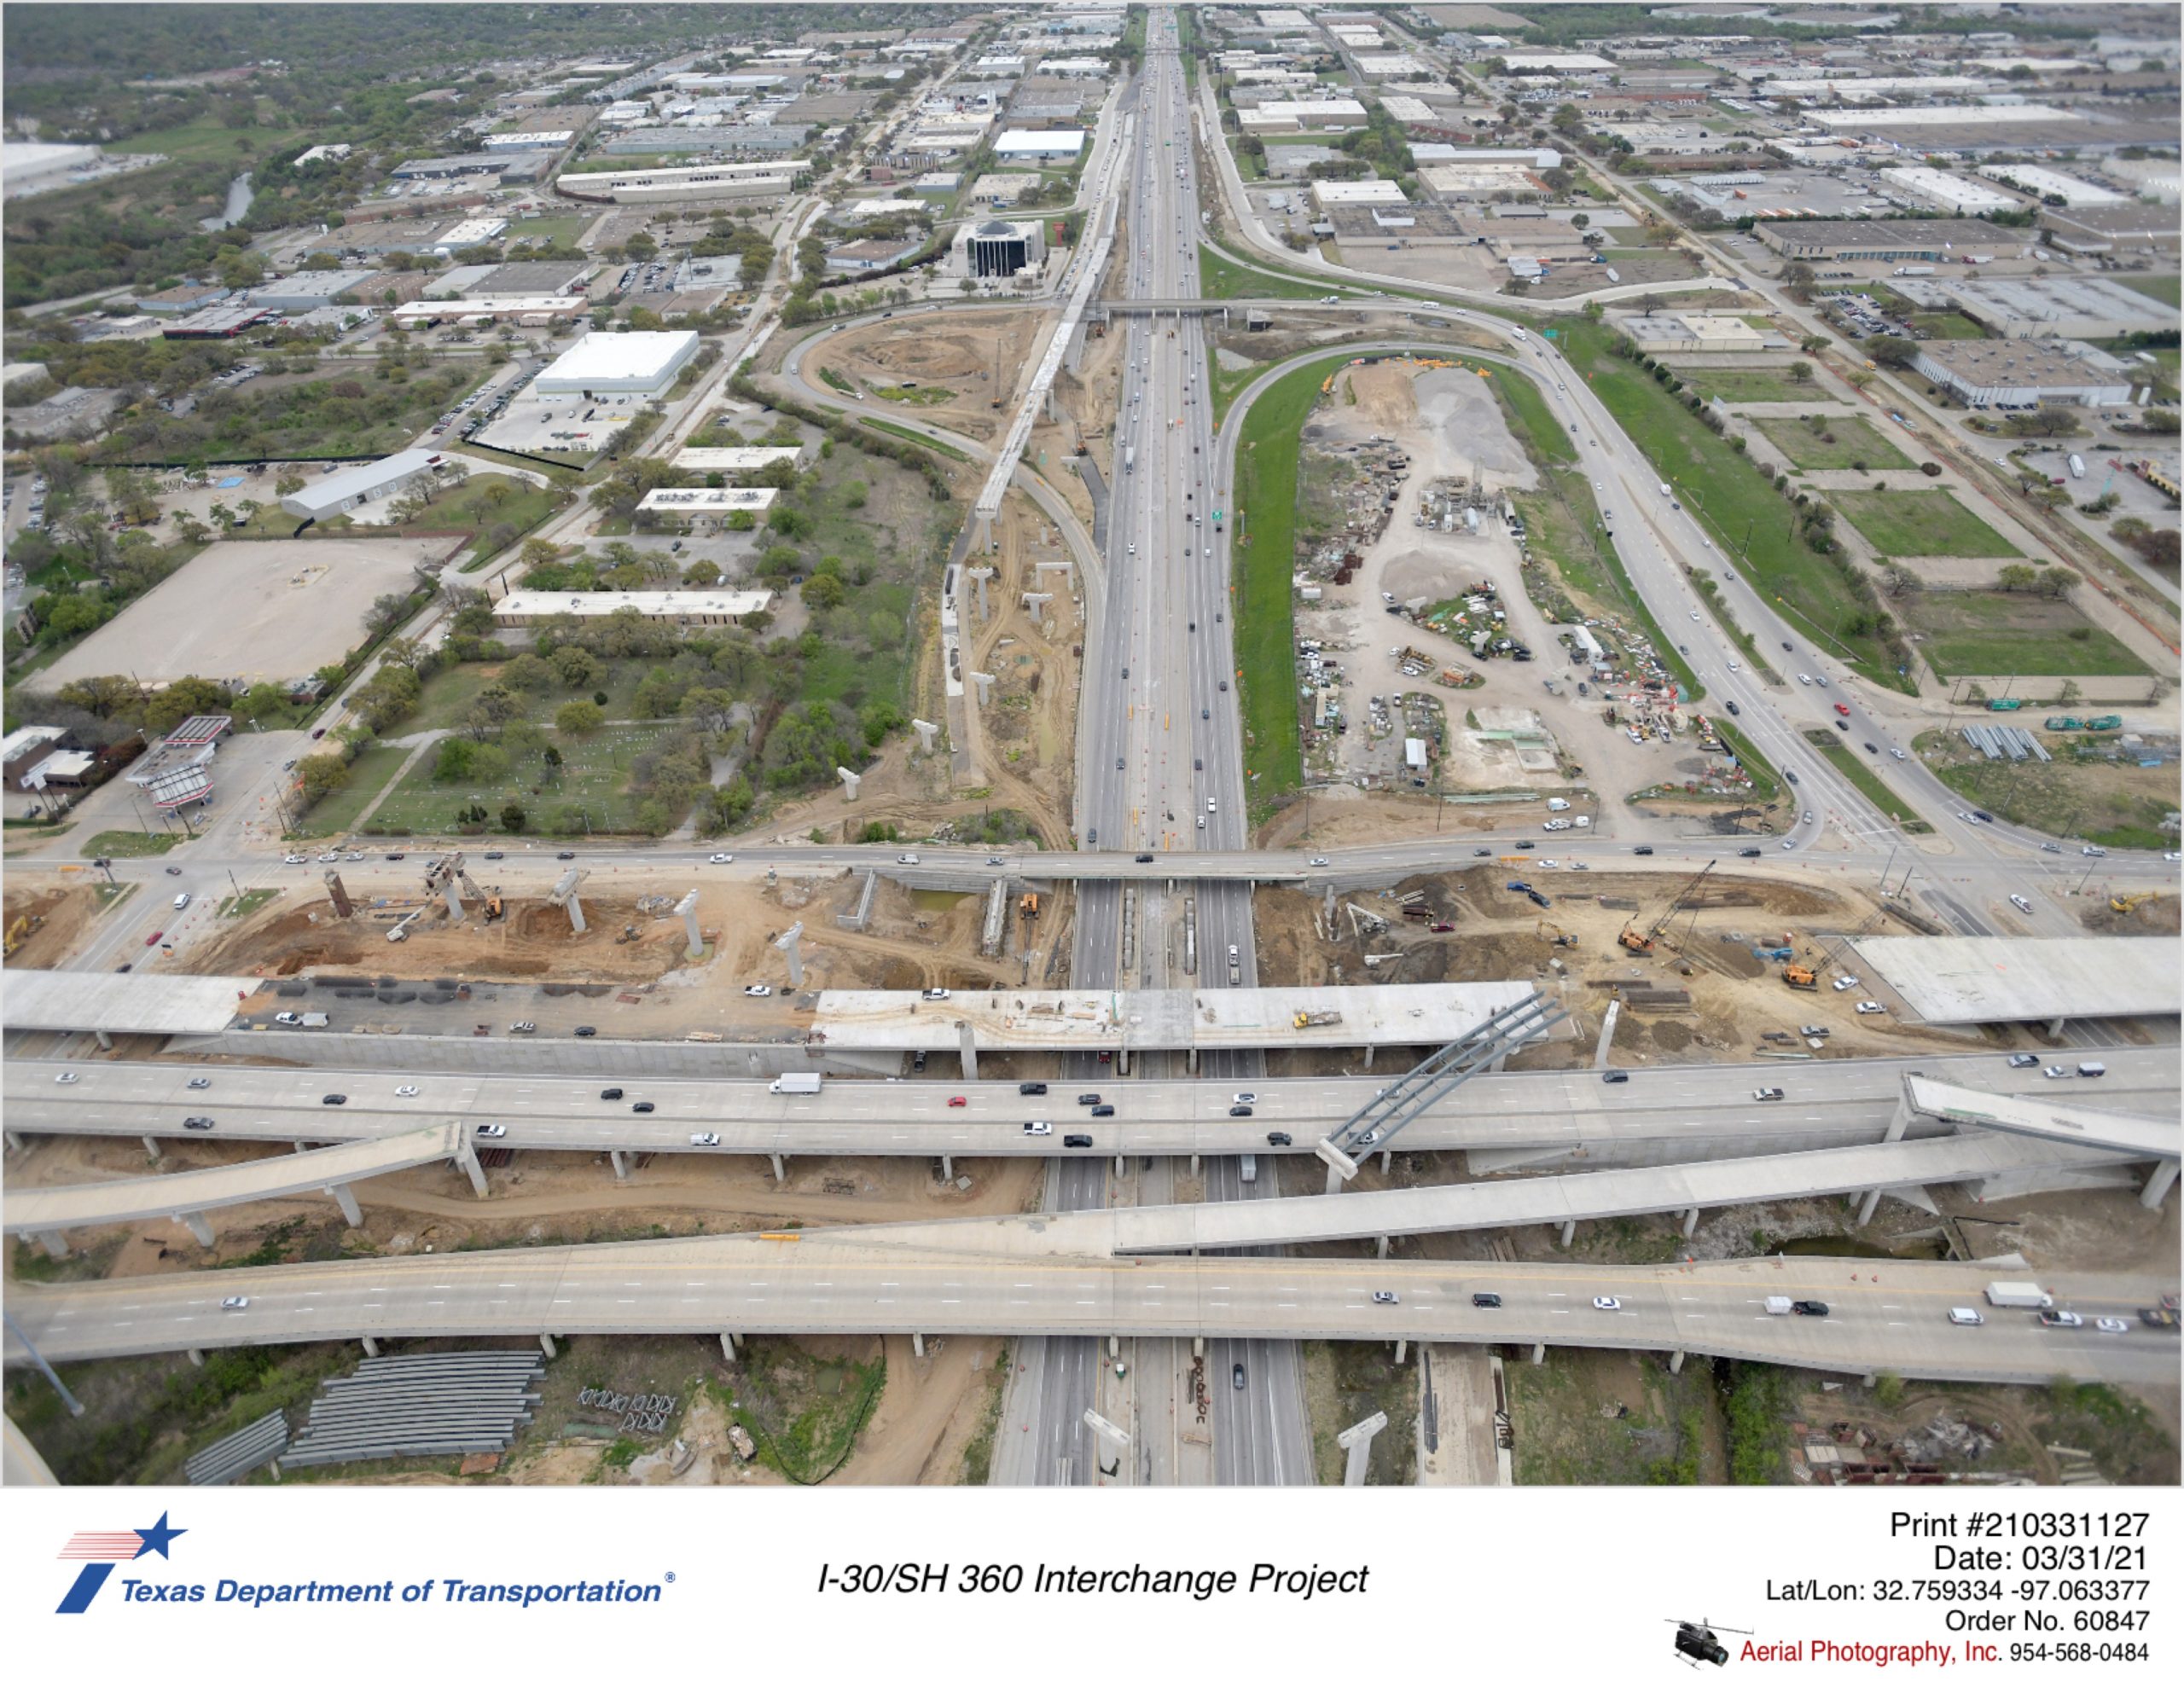 I-30 looking east over SH 360. Focus on SH 360 northbound construction and direct connector bridge construction in northeast quadrant.